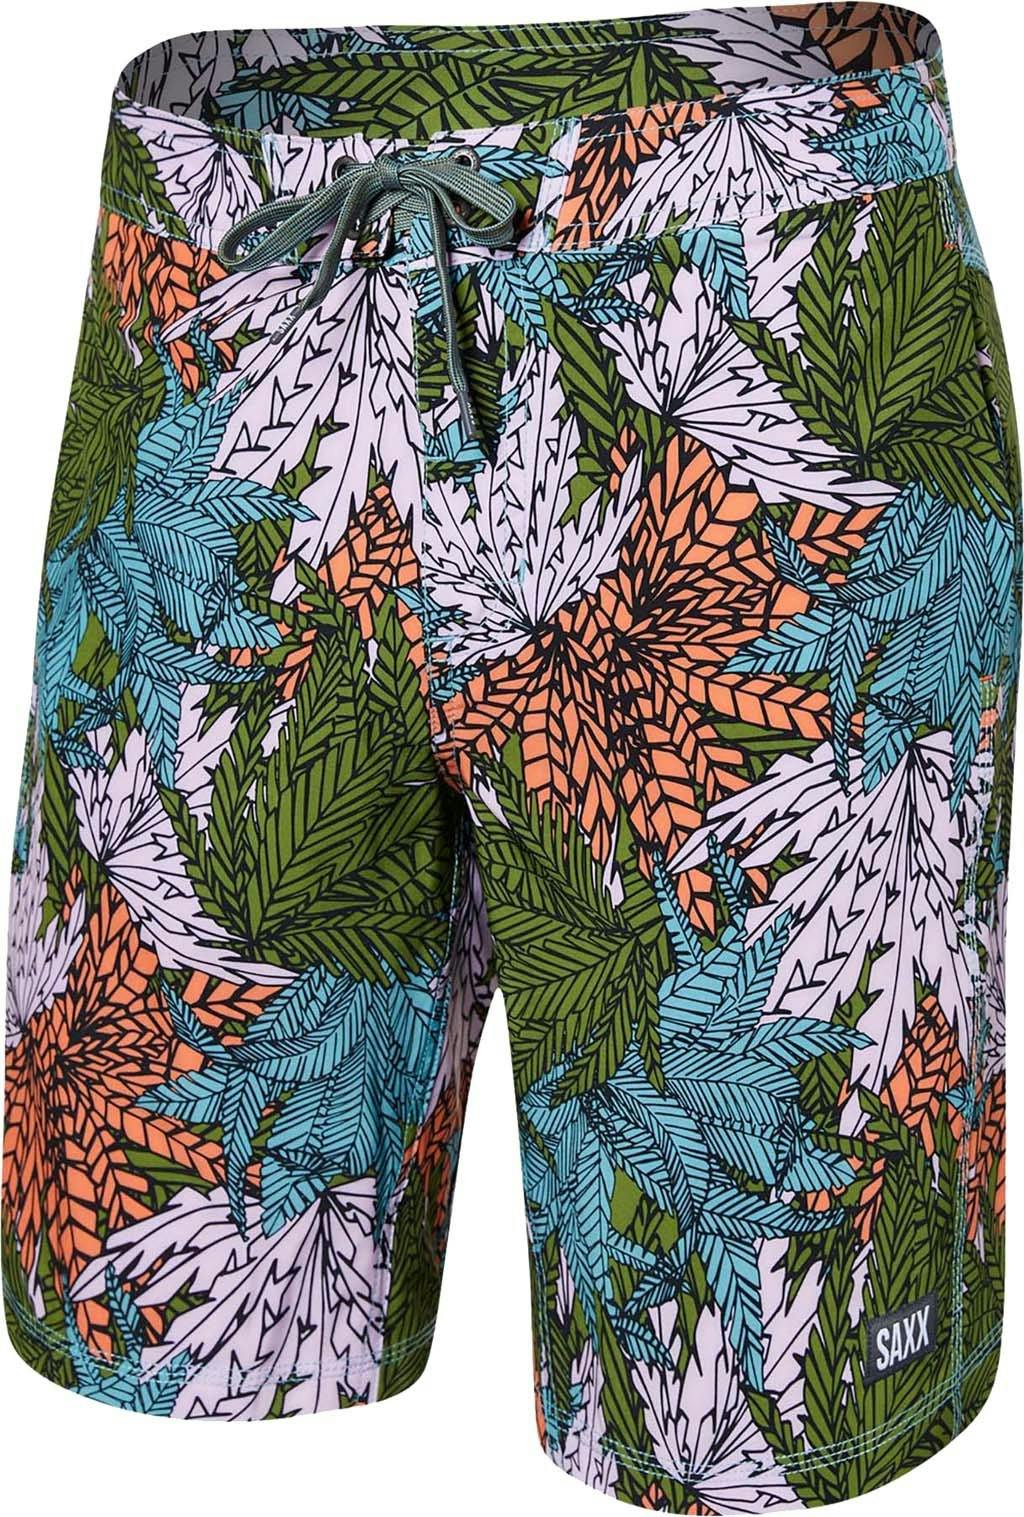 Product image for Betawave Boardshorts 9 in - Men's